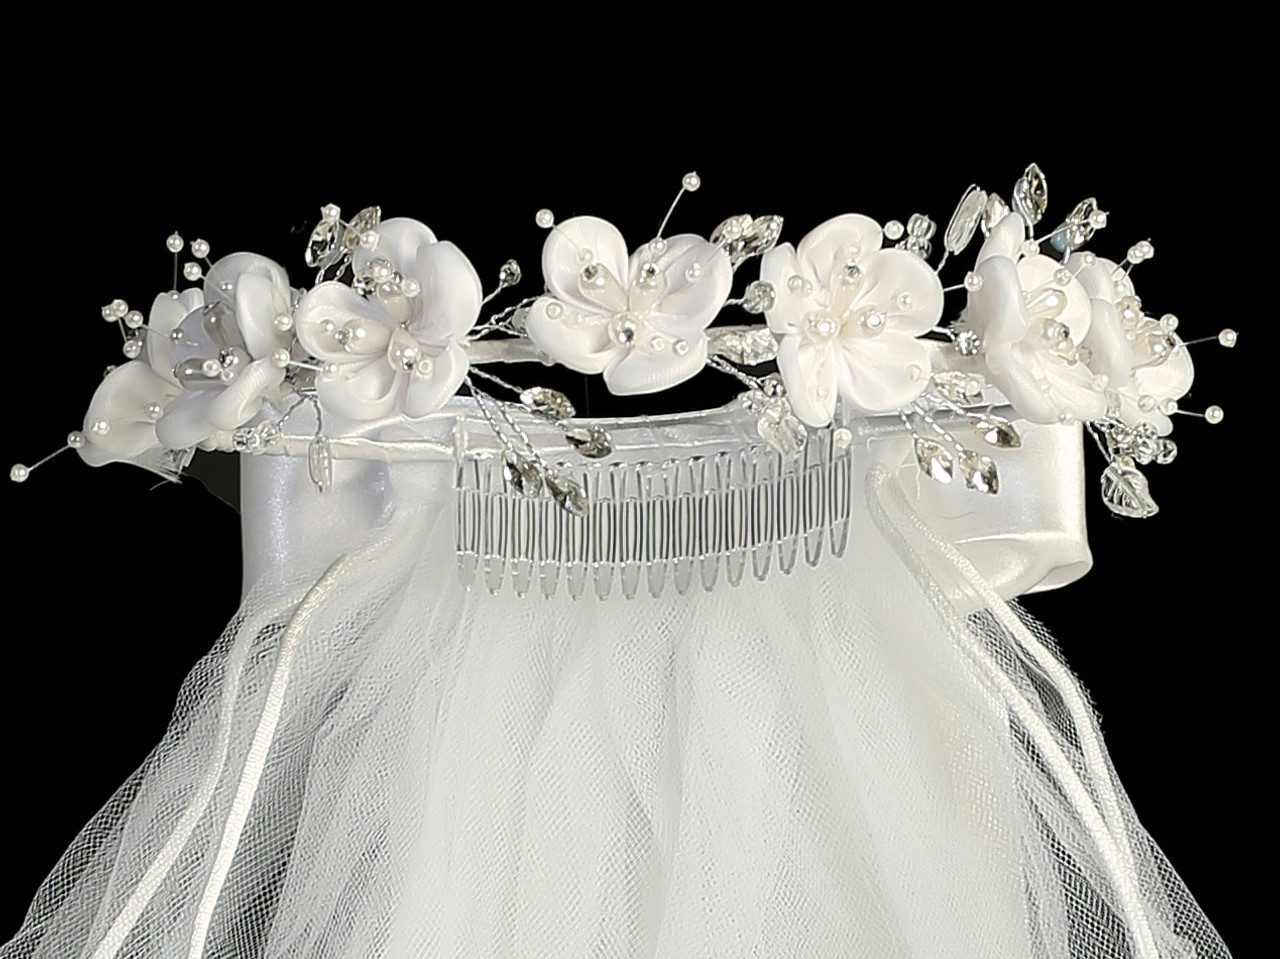 Swea Pea and Lilli 24 Veil with Satin and Crystal Flowers and Pearl Rhinestones | Pink Princess